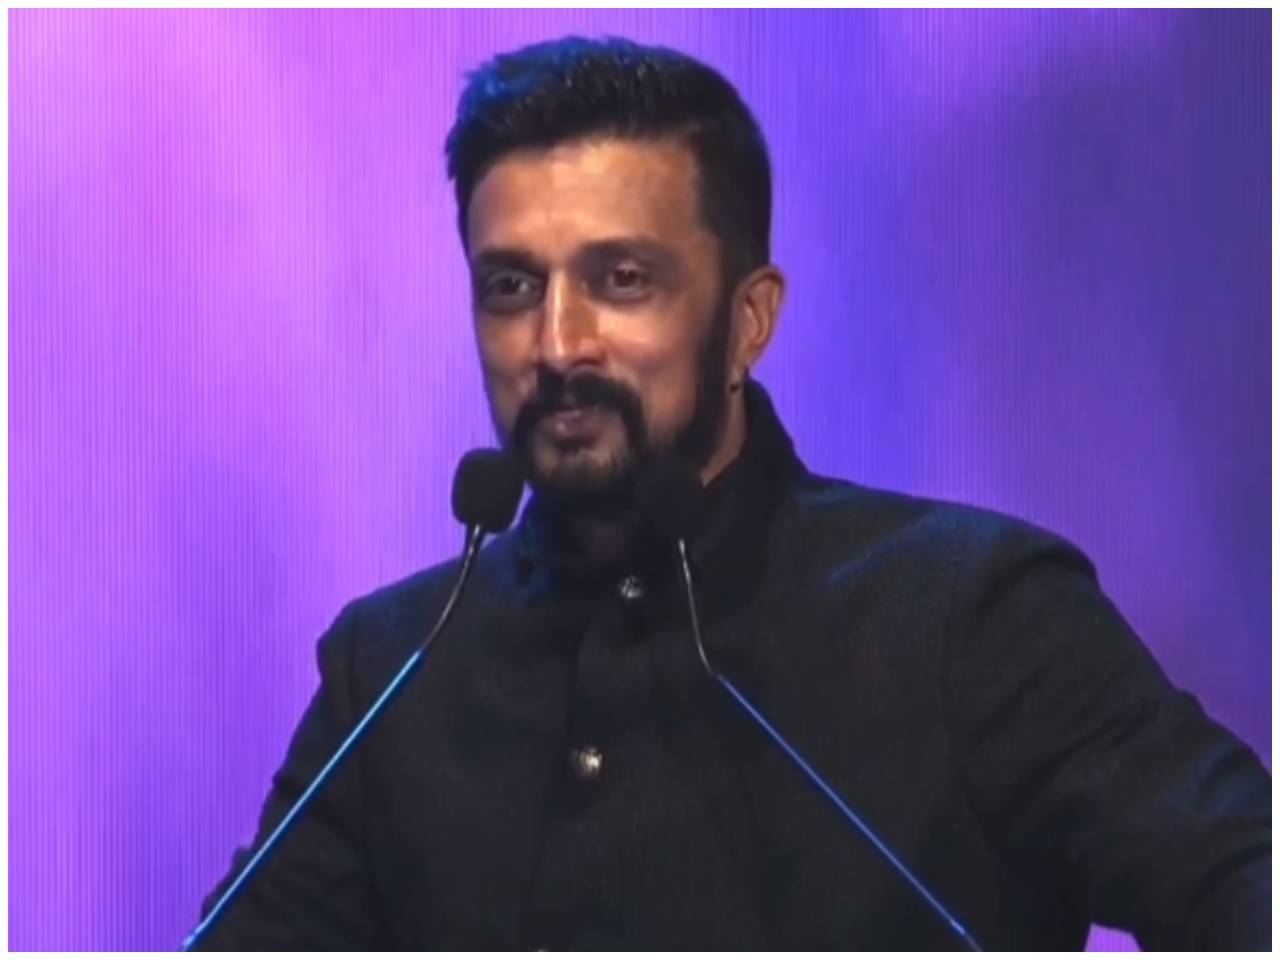 Kiccha Sudeep will be the chief guest at the 51st IFFI opening ceremony